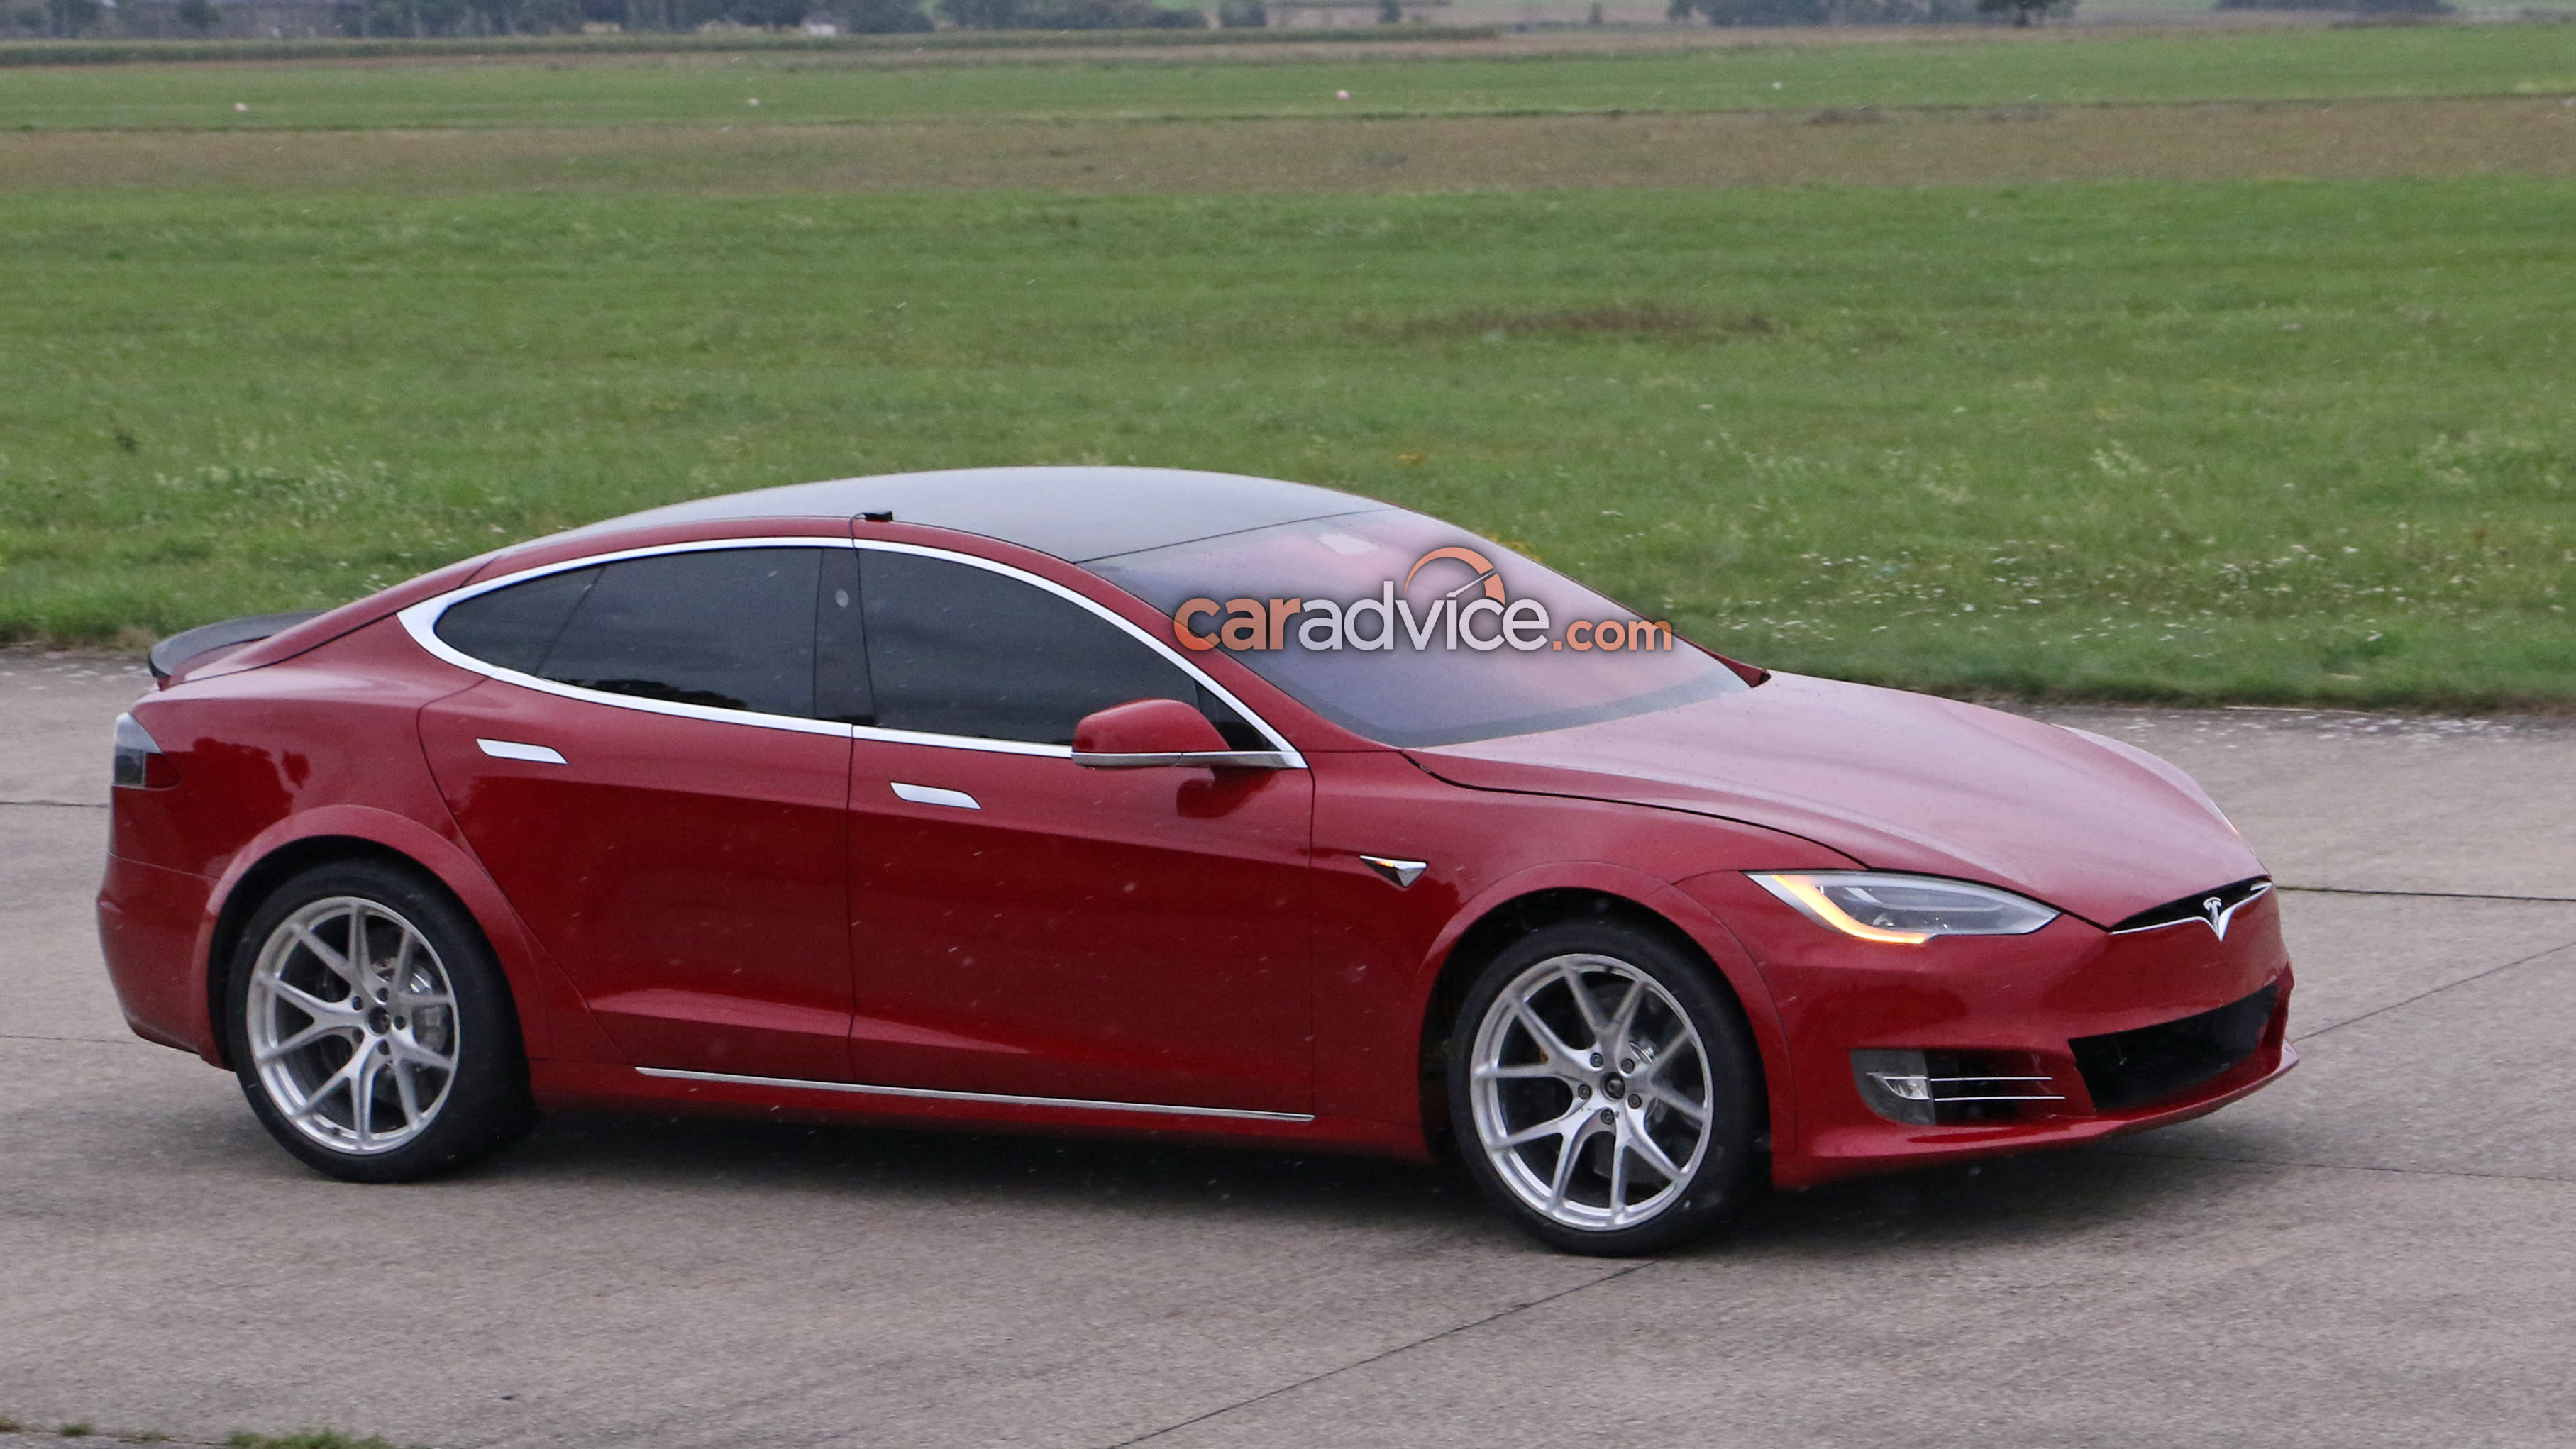 2022 Tesla Model S Plaid A Hypercar With 840km Range Less Than 250k Update Lap Time Caradvice